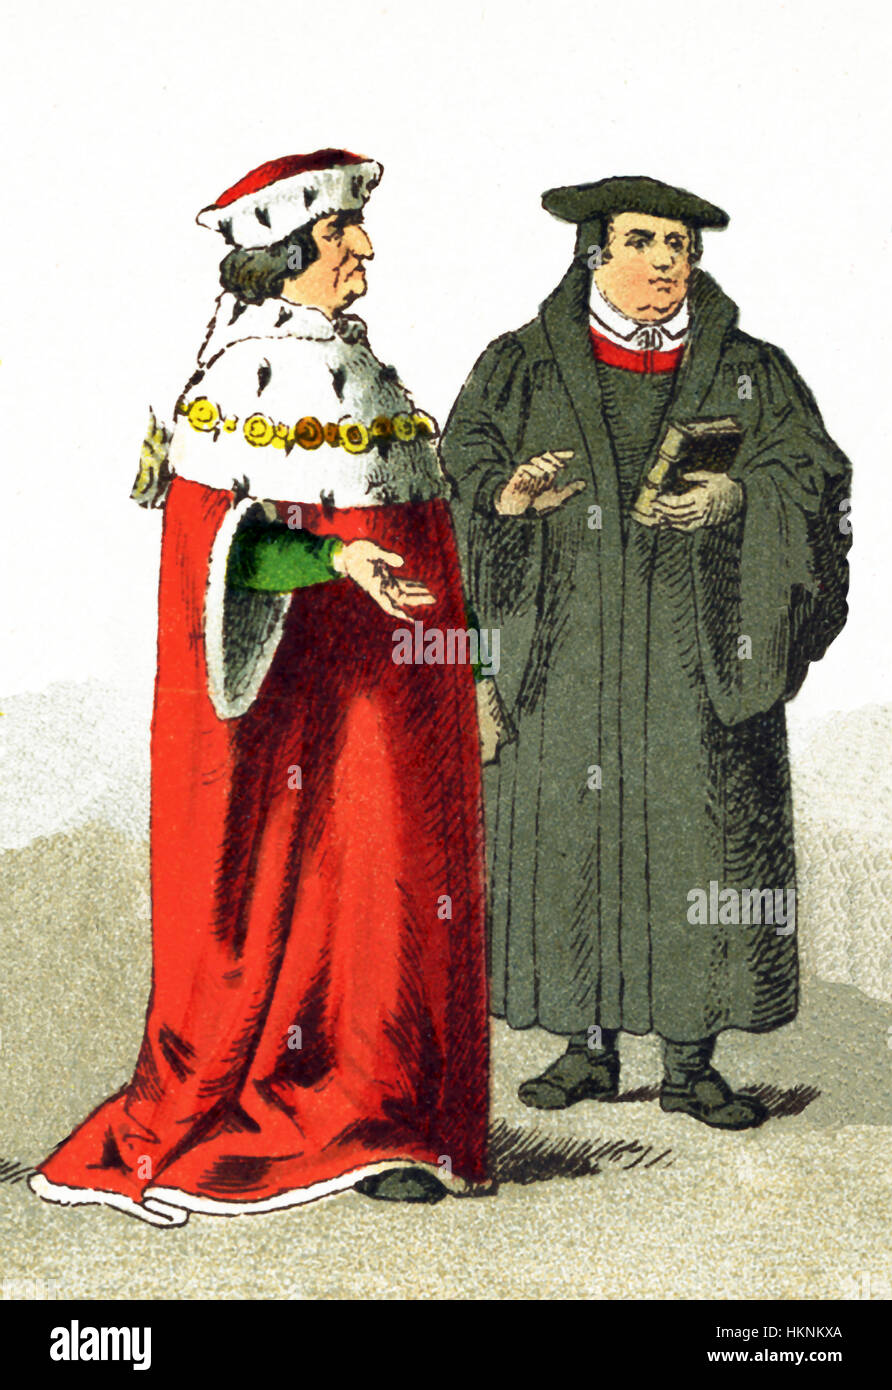 The figures represented here are an elector and Martin Luther. Both are Germans dating to the 1500s. Martin Luther (1483-1746) was leader of the Protestant Reformation. The title 'elector' was the title given a German prince entitled to take part in the election of the Holy Roman Emperor. The illustration dates to 1882. Stock Photo